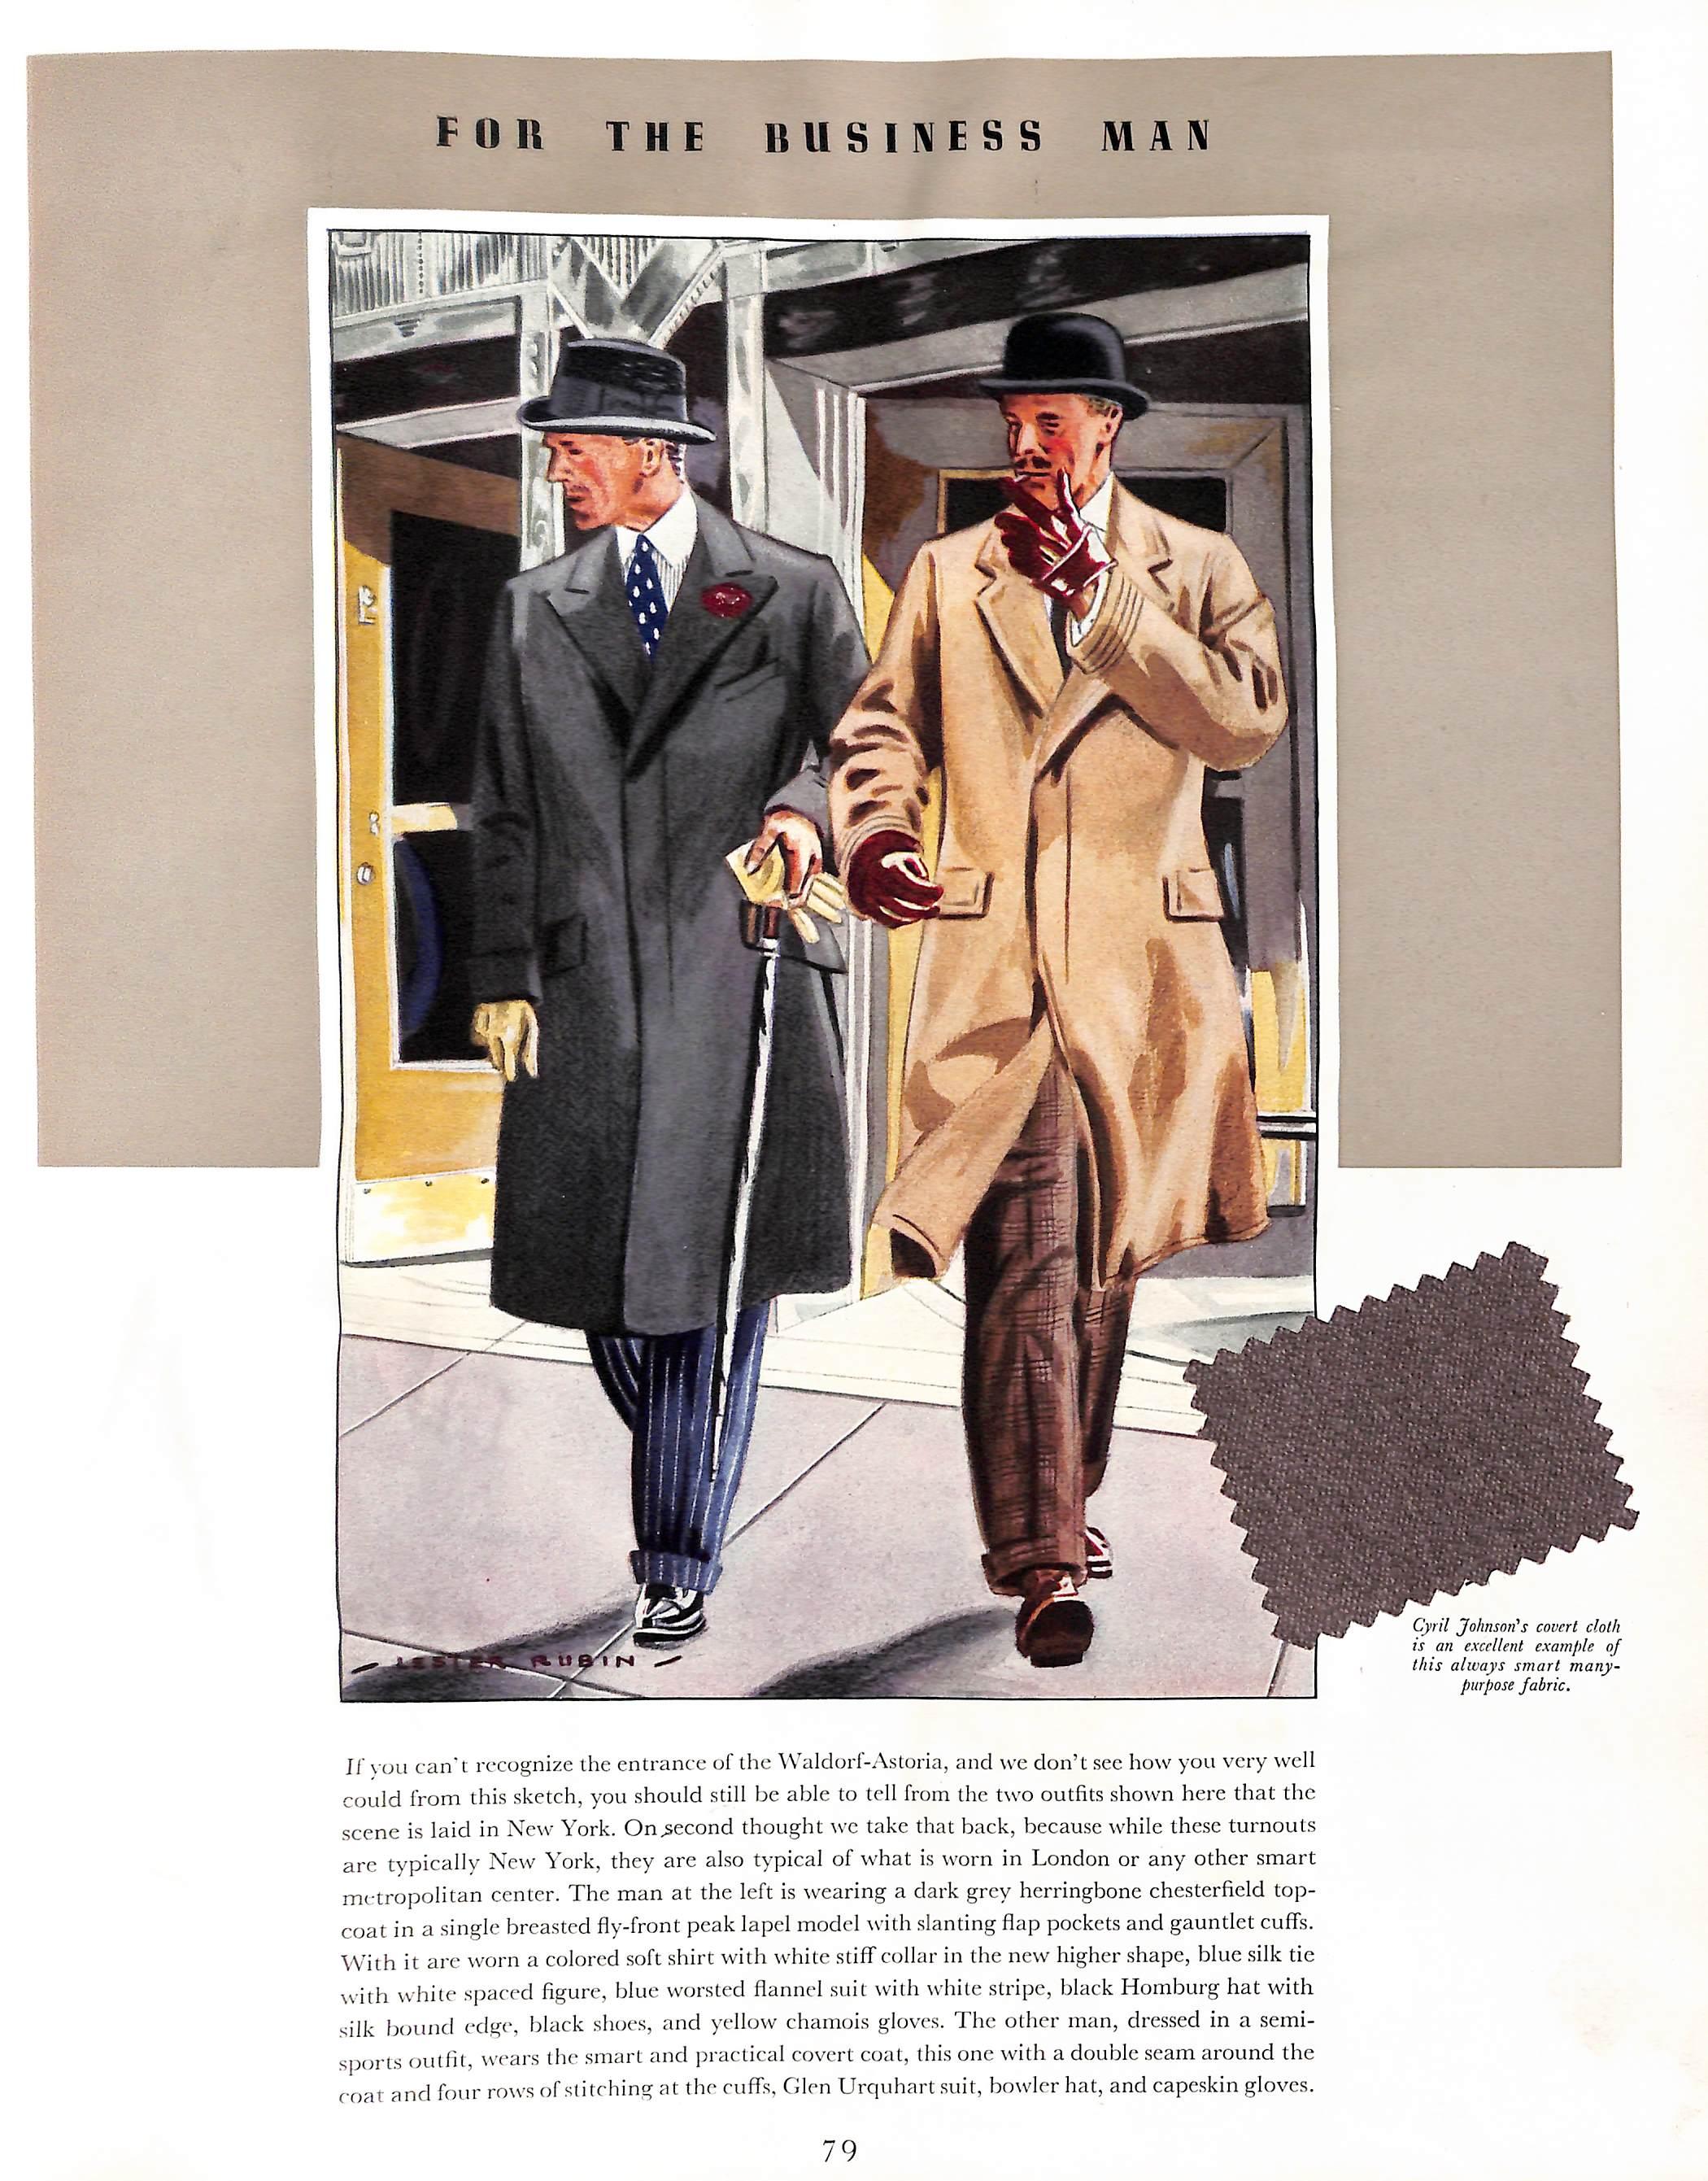 Advance Spring 1937 copy of Apparel Arts.

Volume seven number IIA.

[88] pp.

Featuring classic gentlemen's fashion advertising.

This stylish issue covers the coronation of King Edward the VIII,

and features a spread on the fashion of the